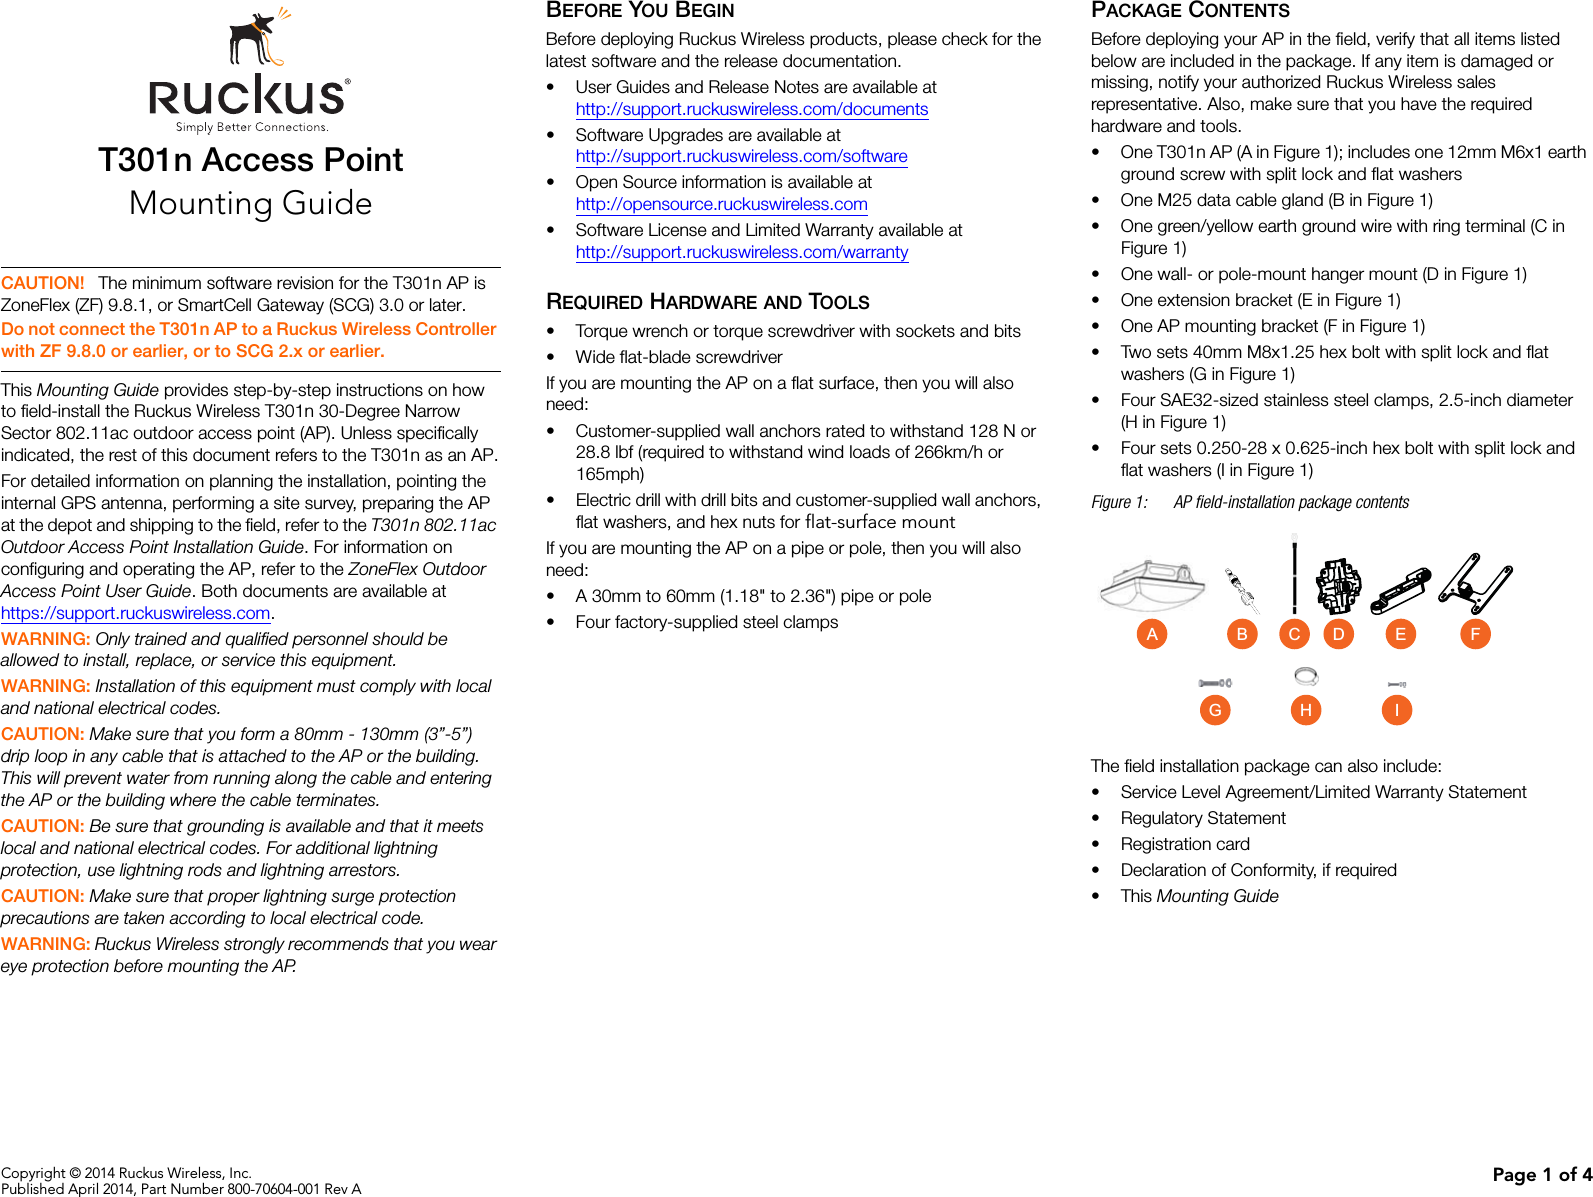 Copyright © 2014 Ruckus Wireless, Inc.Published April 2014, Part Number 800-70604-001 Rev A Page 1 of 4T301n Access PointMounting GuideThis Mounting Guide provides step-by-step instructions on how to field-install the Ruckus Wireless T301n 30-Degree Narrow Sector 802.11ac outdoor access point (AP). Unless specifically indicated, the rest of this document refers to the T301n as an AP.For detailed information on planning the installation, pointing the internal GPS antenna, performing a site survey, preparing the AP at the depot and shipping to the field, refer to the T301n 802.11ac Outdoor Access Point Installation Guide. For information on configuring and operating the AP, refer to the ZoneFlex Outdoor Access Point User Guide. Both documents are available at https://support.ruckuswireless.com.WARNING: Only trained and qualified personnel should be allowed to install, replace, or service this equipment. WARNING: Installation of this equipment must comply with local and national electrical codes. CAUTION: Make sure that you form a 80mm - 130mm (3”-5”) drip loop in any cable that is attached to the AP or the building. This will prevent water from running along the cable and entering the AP or the building where the cable terminates. CAUTION: Be sure that grounding is available and that it meets local and national electrical codes. For additional lightning protection, use lightning rods and lightning arrestors. CAUTION: Make sure that proper lightning surge protection precautions are taken according to local electrical code. WARNING: Ruckus Wireless strongly recommends that you wear eye protection before mounting the AP.BEFORE YOU BEGINBefore deploying Ruckus Wireless products, please check for the latest software and the release documentation.• User Guides and Release Notes are available athttp://support.ruckuswireless.com/documents• Software Upgrades are available athttp://support.ruckuswireless.com/software• Open Source information is available athttp://opensource.ruckuswireless.com• Software License and Limited Warranty available athttp://support.ruckuswireless.com/warrantyREQUIRED HARDWARE AND TOOLS• Torque wrench or torque screwdriver with sockets and bits• Wide flat-blade screwdriverIf you are mounting the AP on a flat surface, then you will also need:• Customer-supplied wall anchors rated to withstand 128 N or 28.8 lbf (required to withstand wind loads of 266km/h or 165mph)• Electric drill with drill bits and customer-supplied wall anchors, flat washers, and hex nuts for flat-surface mountIf you are mounting the AP on a pipe or pole, then you will also need:• A 30mm to 60mm (1.18&quot; to 2.36&quot;) pipe or pole• Four factory-supplied steel clampsPACKAGE CONTENTSBefore deploying your AP in the field, verify that all items listed below are included in the package. If any item is damaged or missing, notify your authorized Ruckus Wireless sales representative. Also, make sure that you have the required hardware and tools. • One T301n AP (A in Figure 1); includes one 12mm M6x1 earth ground screw with split lock and flat washers• One M25 data cable gland (B in Figure 1)• One green/yellow earth ground wire with ring terminal (C in Figure 1)• One wall- or pole-mount hanger mount (D in Figure 1)• One extension bracket (E in Figure 1)• One AP mounting bracket (F in Figure 1)• Two sets 40mm M8x1.25 hex bolt with split lock and flat washers (G in Figure 1)• Four SAE32-sized stainless steel clamps, 2.5-inch diameter (H in Figure 1)• Four sets 0.250-28 x 0.625-inch hex bolt with split lock and flat washers (I in Figure 1)Figure 1: AP field-installation package contentsThe field installation package can also include: • Service Level Agreement/Limited Warranty Statement• Regulatory Statement• Registration card• Declaration of Conformity, if required•This Mounting Guide CAUTION! The minimum software revision for the T301n AP is ZoneFlex (ZF) 9.8.1, or SmartCell Gateway (SCG) 3.0 or later.Do not connect the T301n AP to a Ruckus Wireless Controller with ZF 9.8.0 or earlier, or to SCG 2.x or earlier.FGHEA CB DI